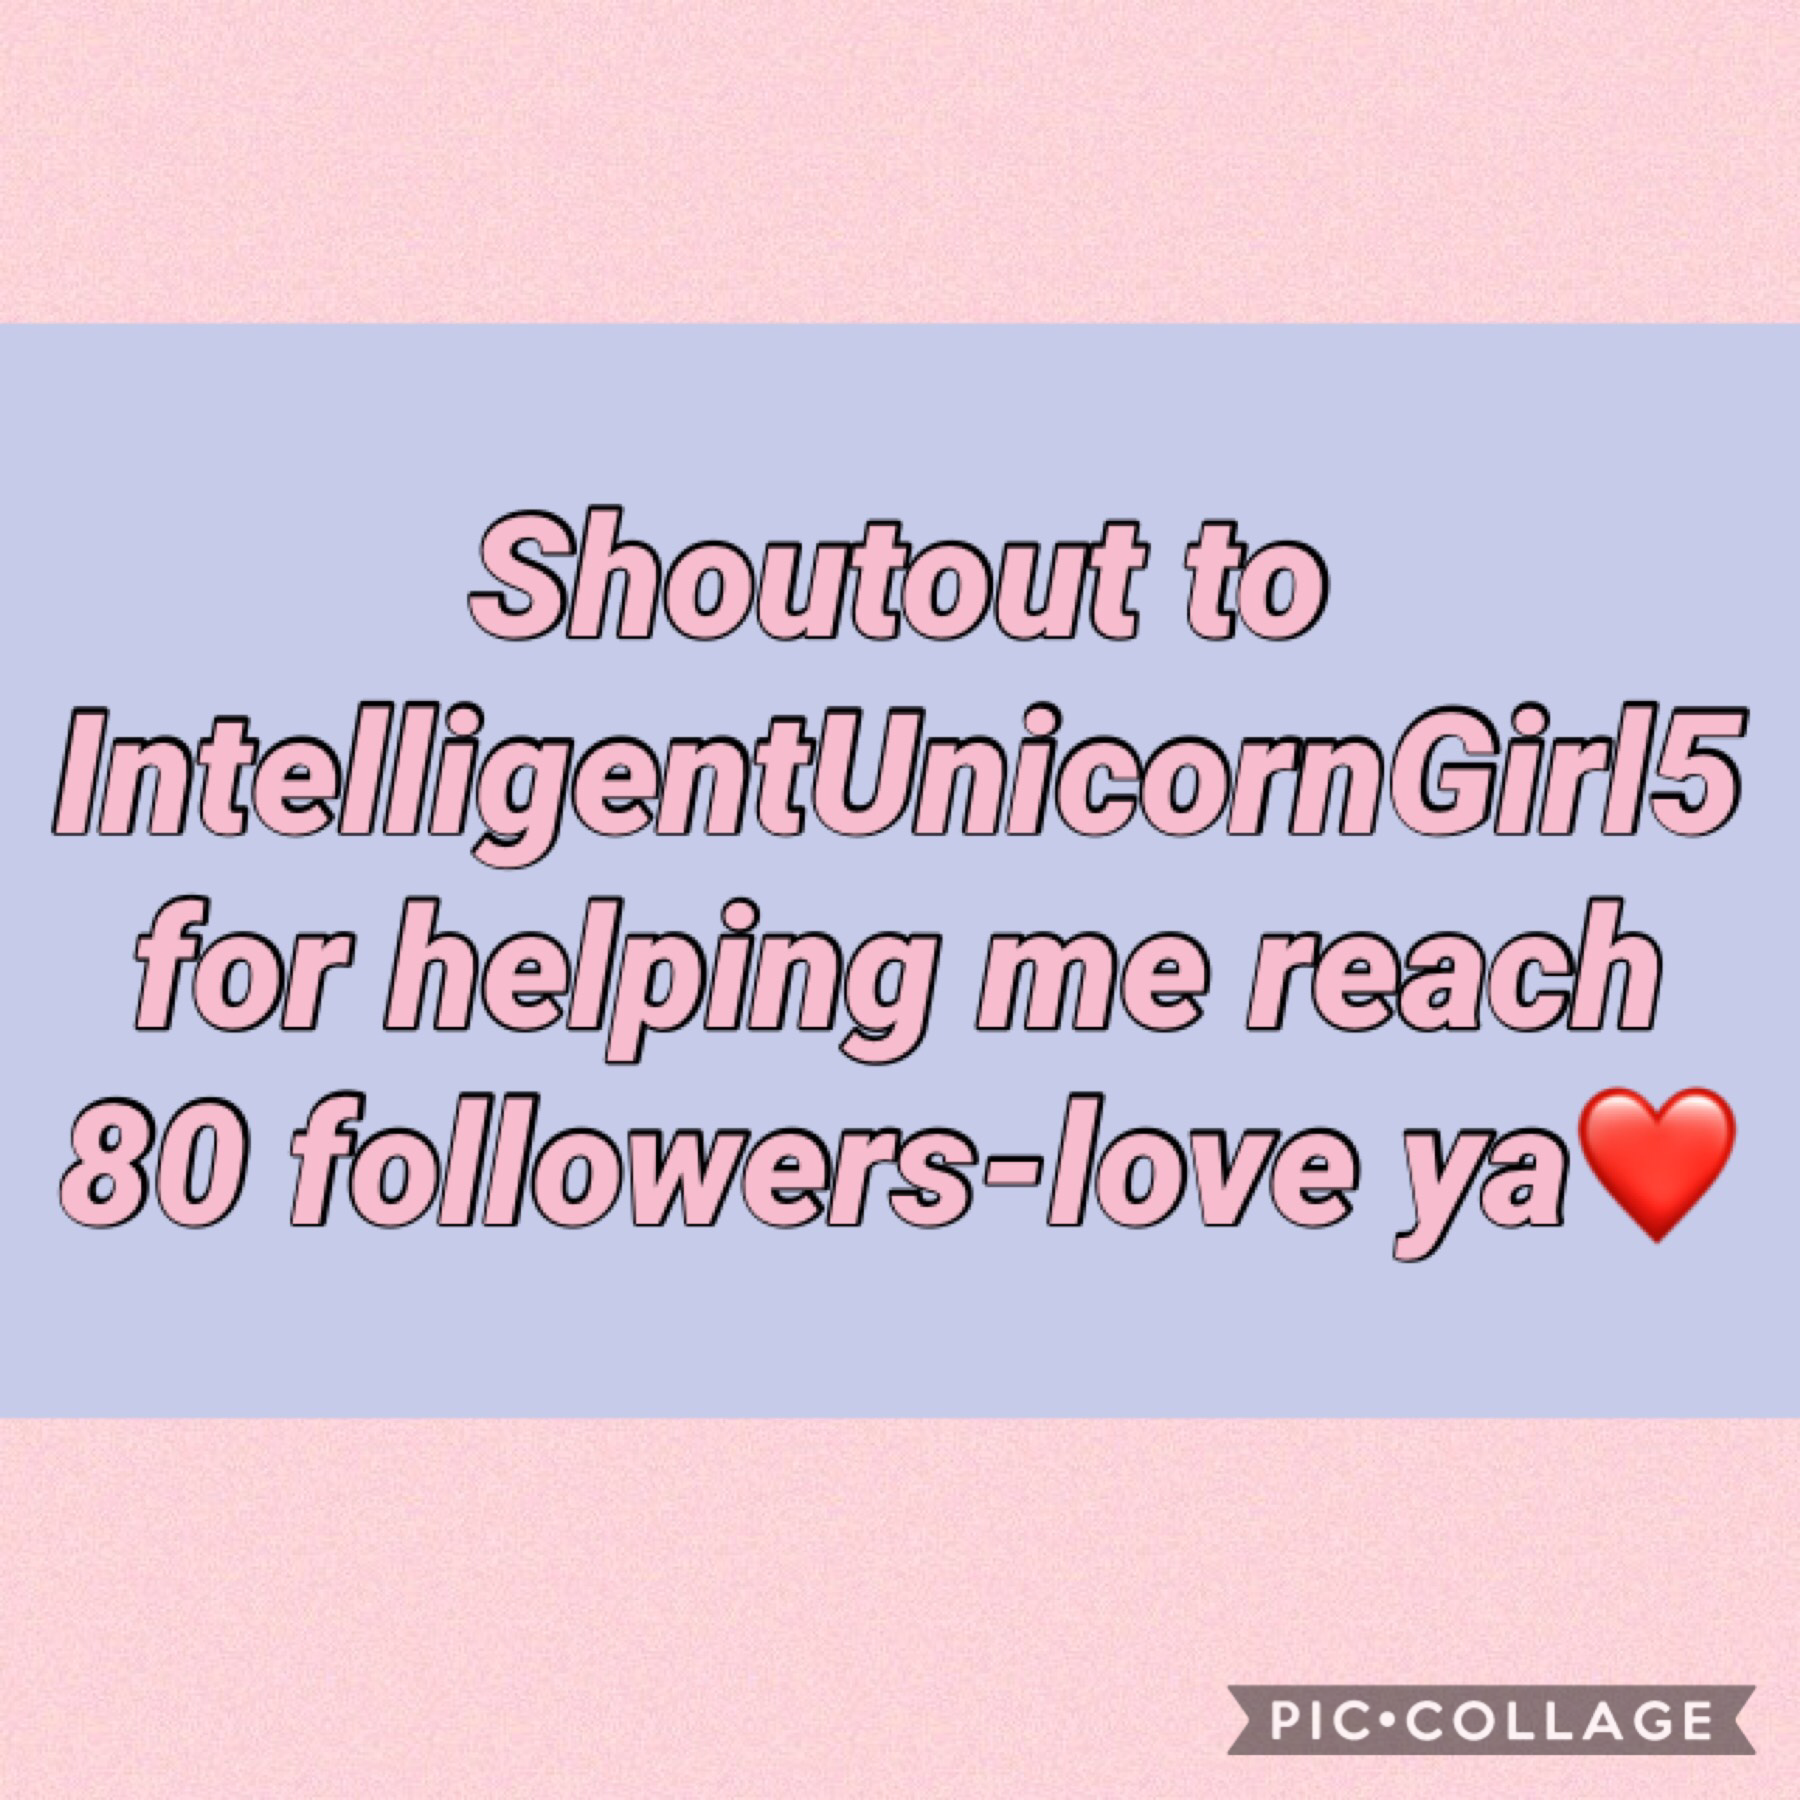 And ofc ily all too💖